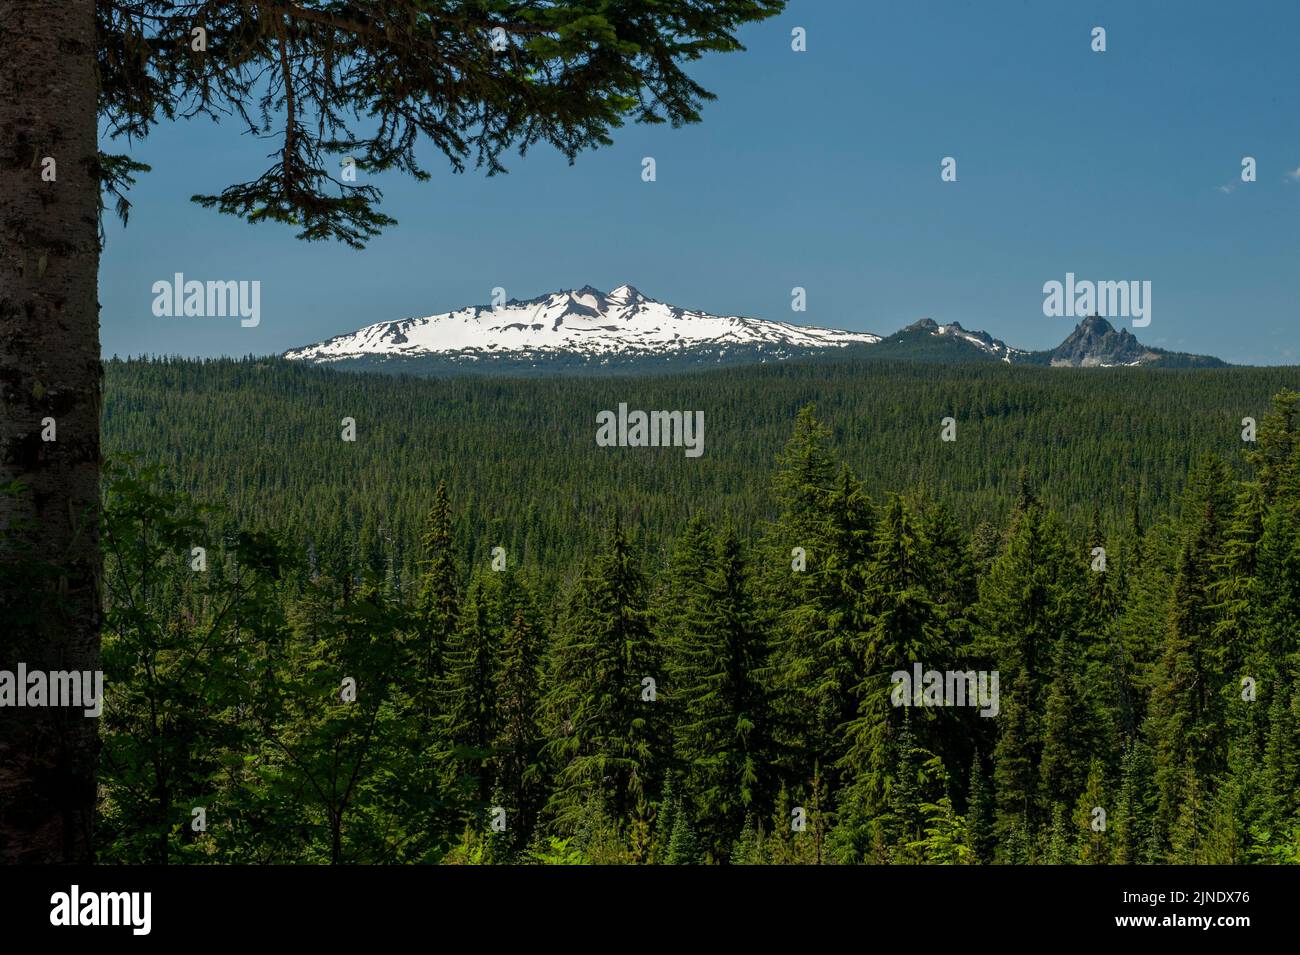 Diamond Peak, as seen from a highway viewpoint at Willamette Pass, Oregon.  The twin peaks of Mt. Yoran are to the right. Stock Photo